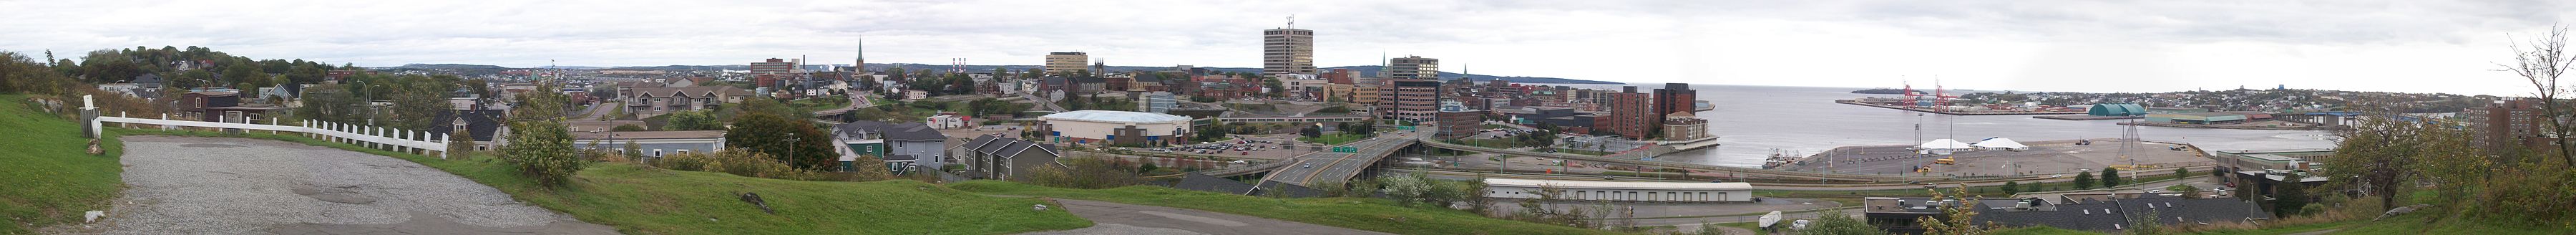 View from Fort Howe of the Saint John skyline prior to Peel Plaza.